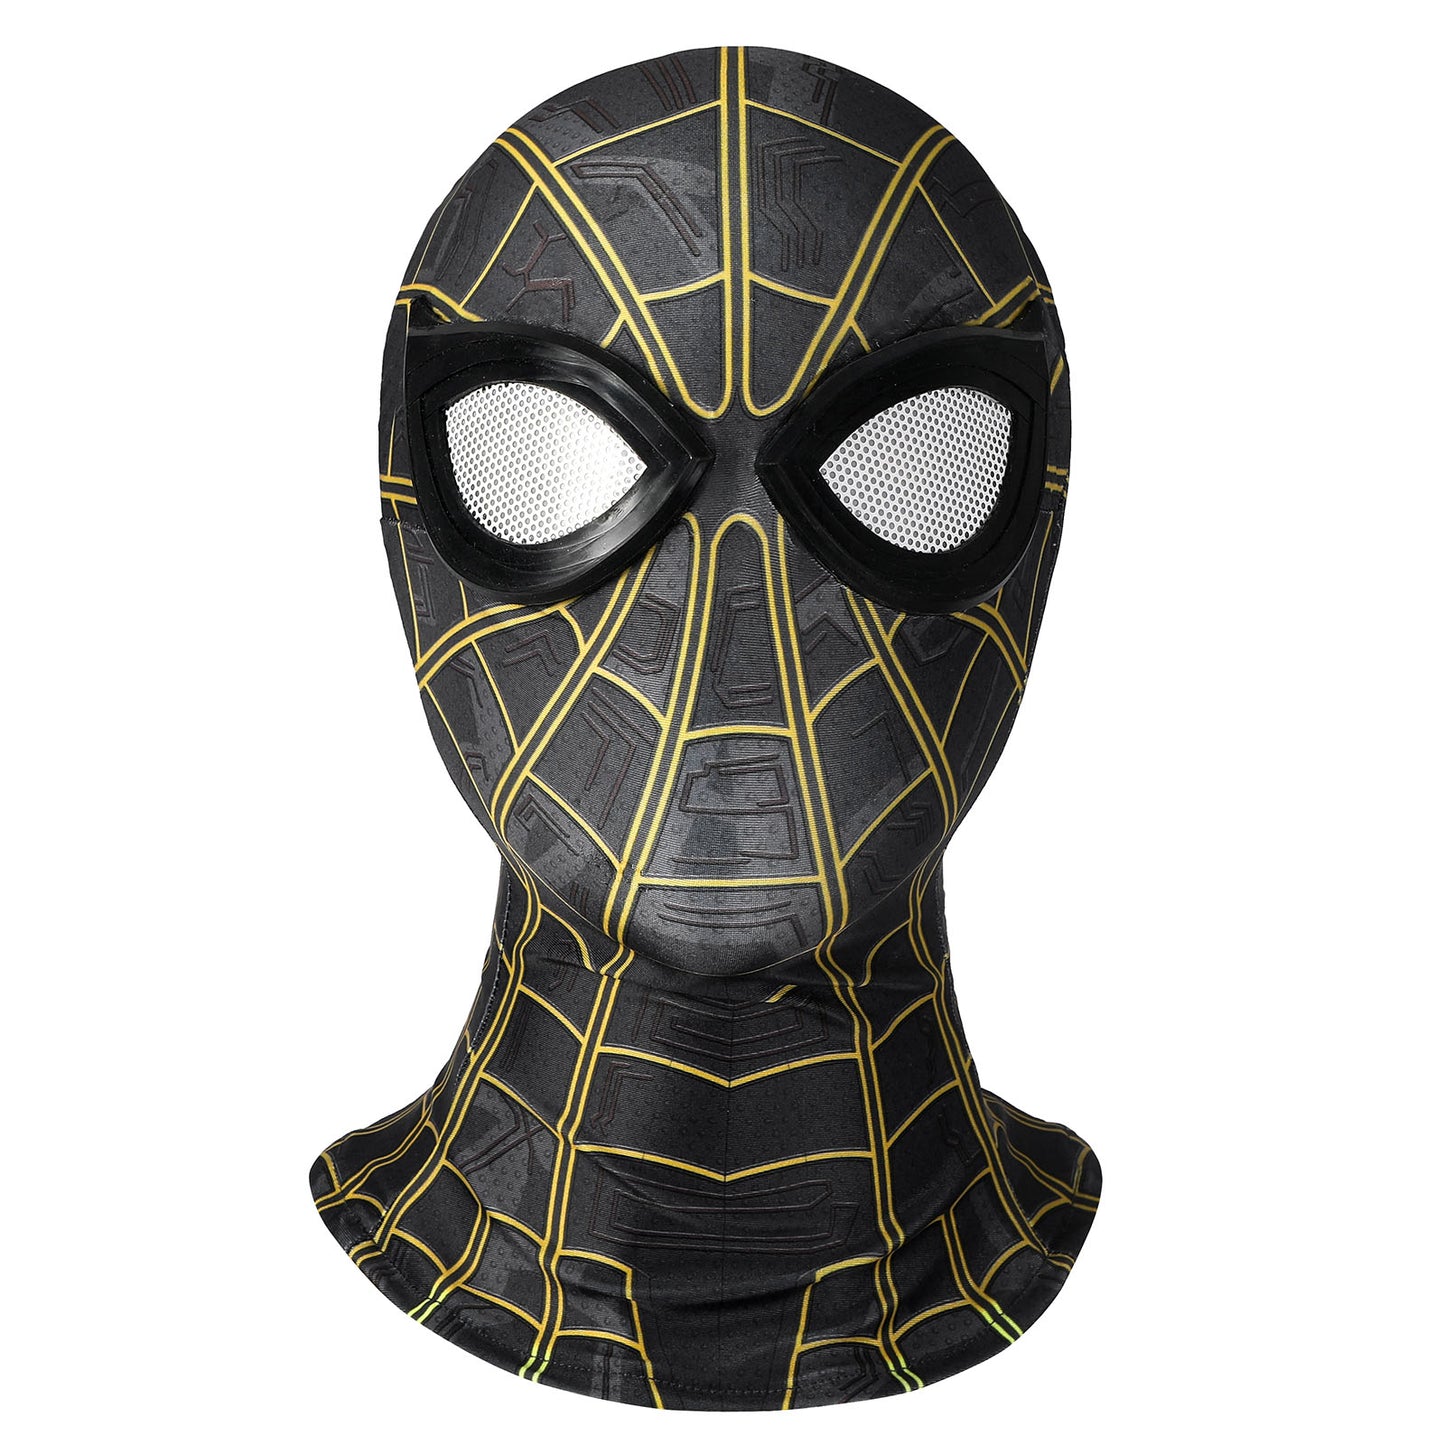 Spider-Man 3 No Way Home Peter Parker Black and Gold Suit Jumpsuit Cosplay Costumes